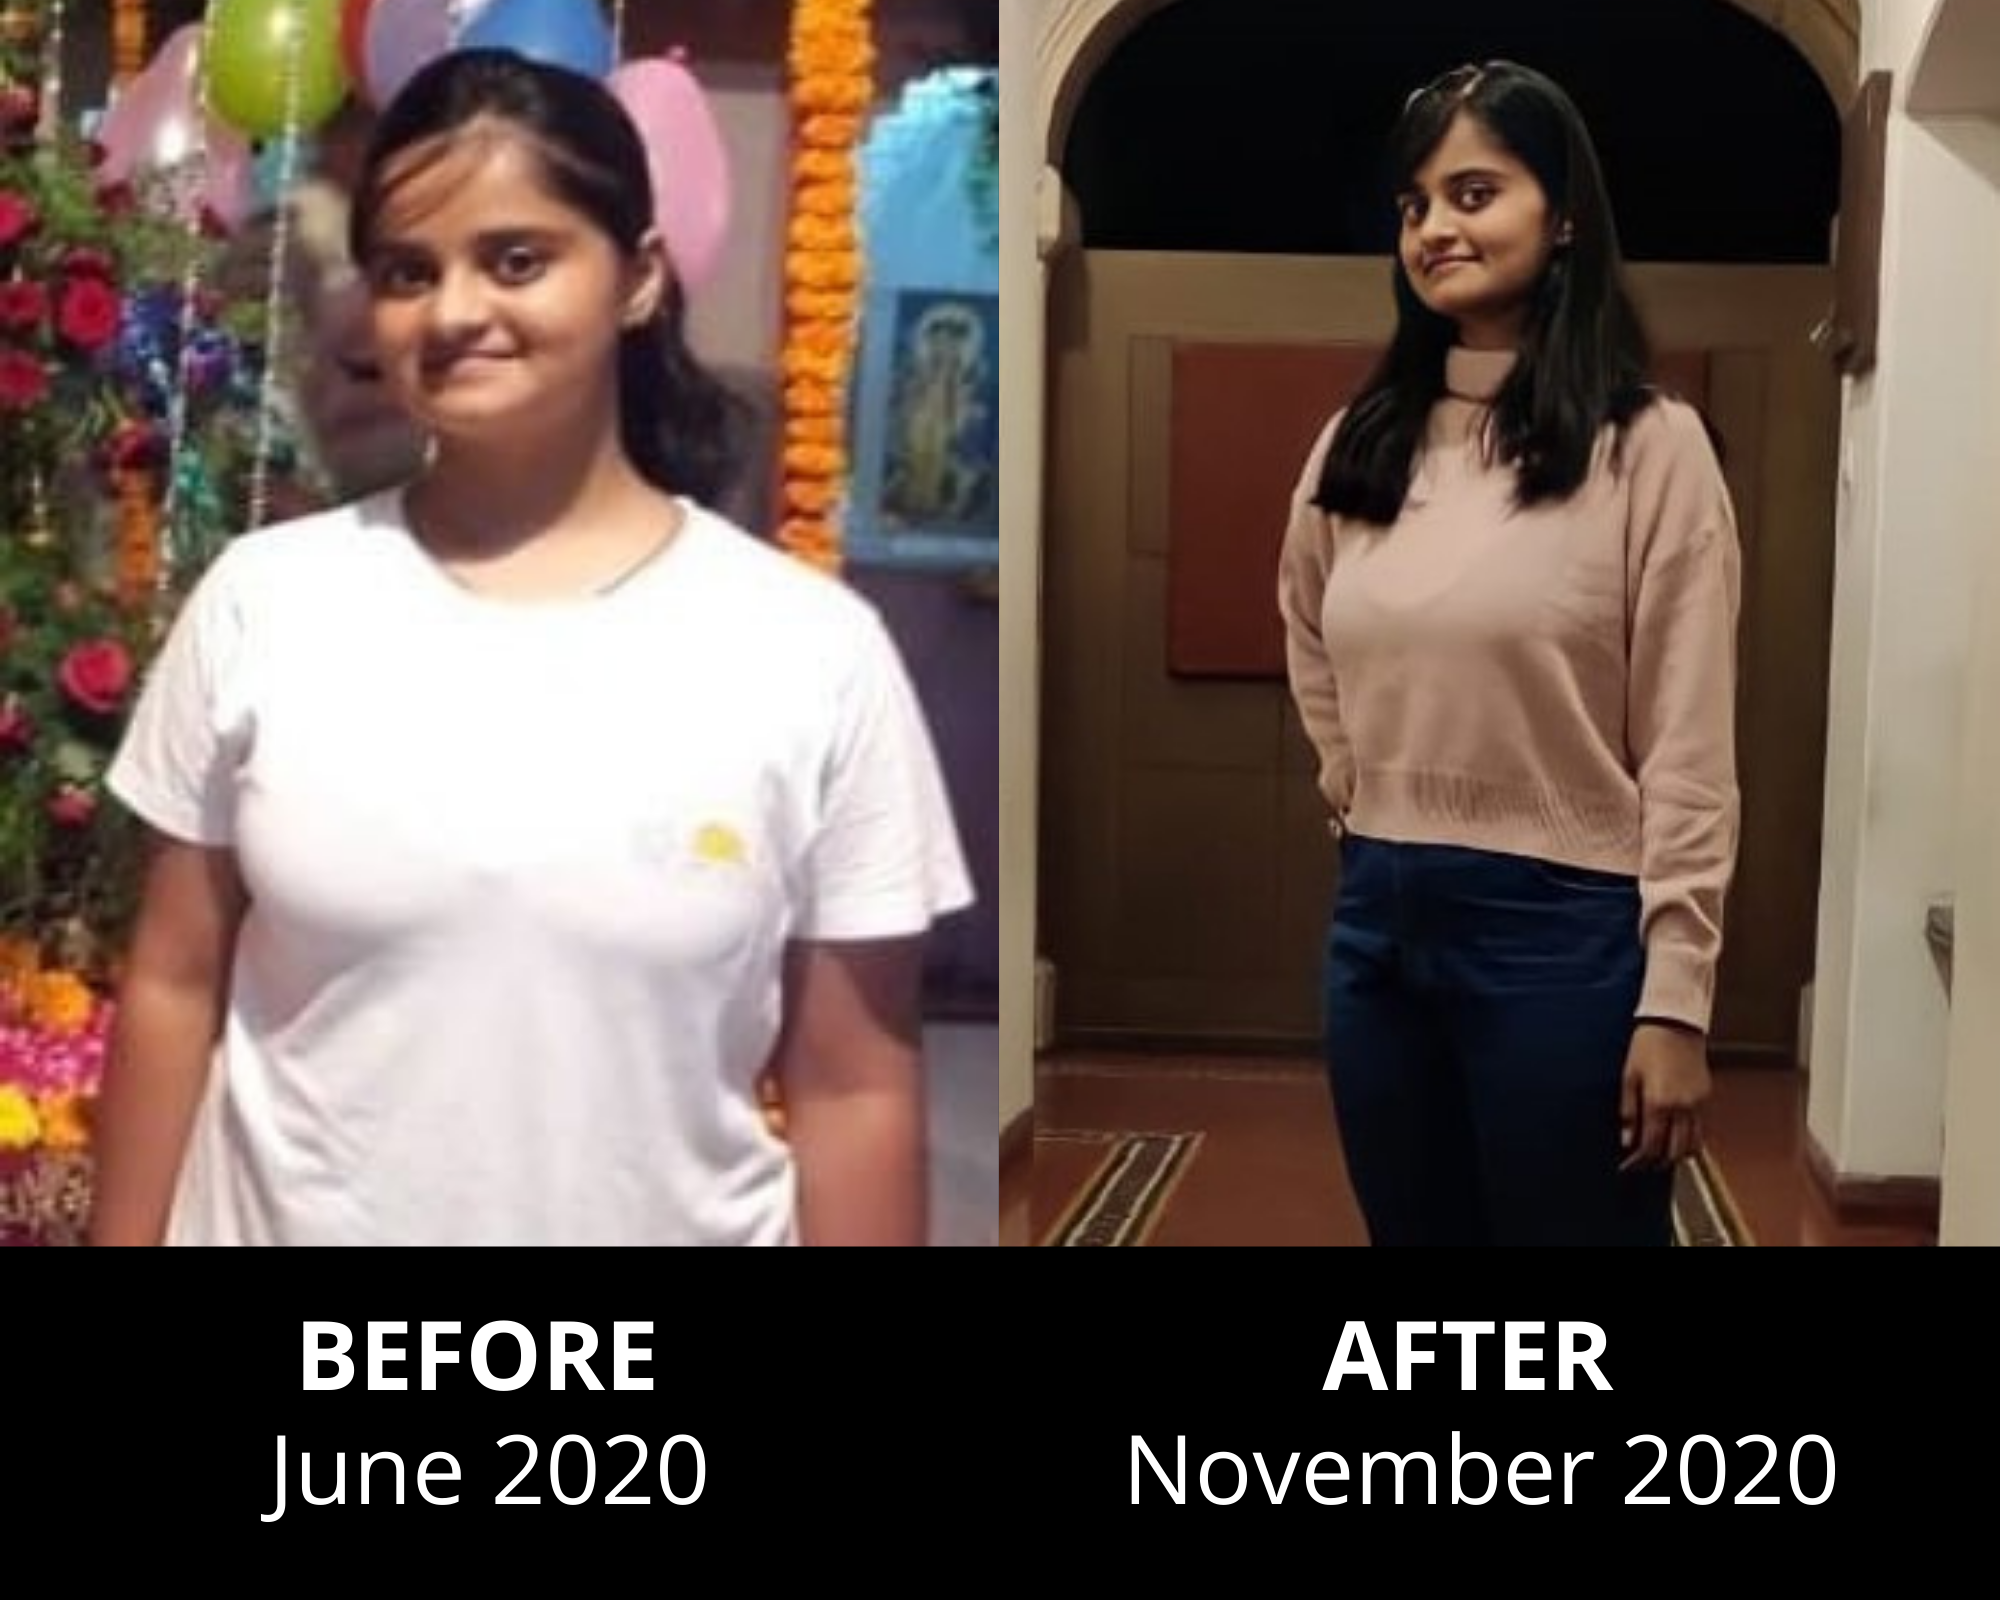 Vidhi's journey of reducing psoriasis, weight & anxiety, all in 30 days